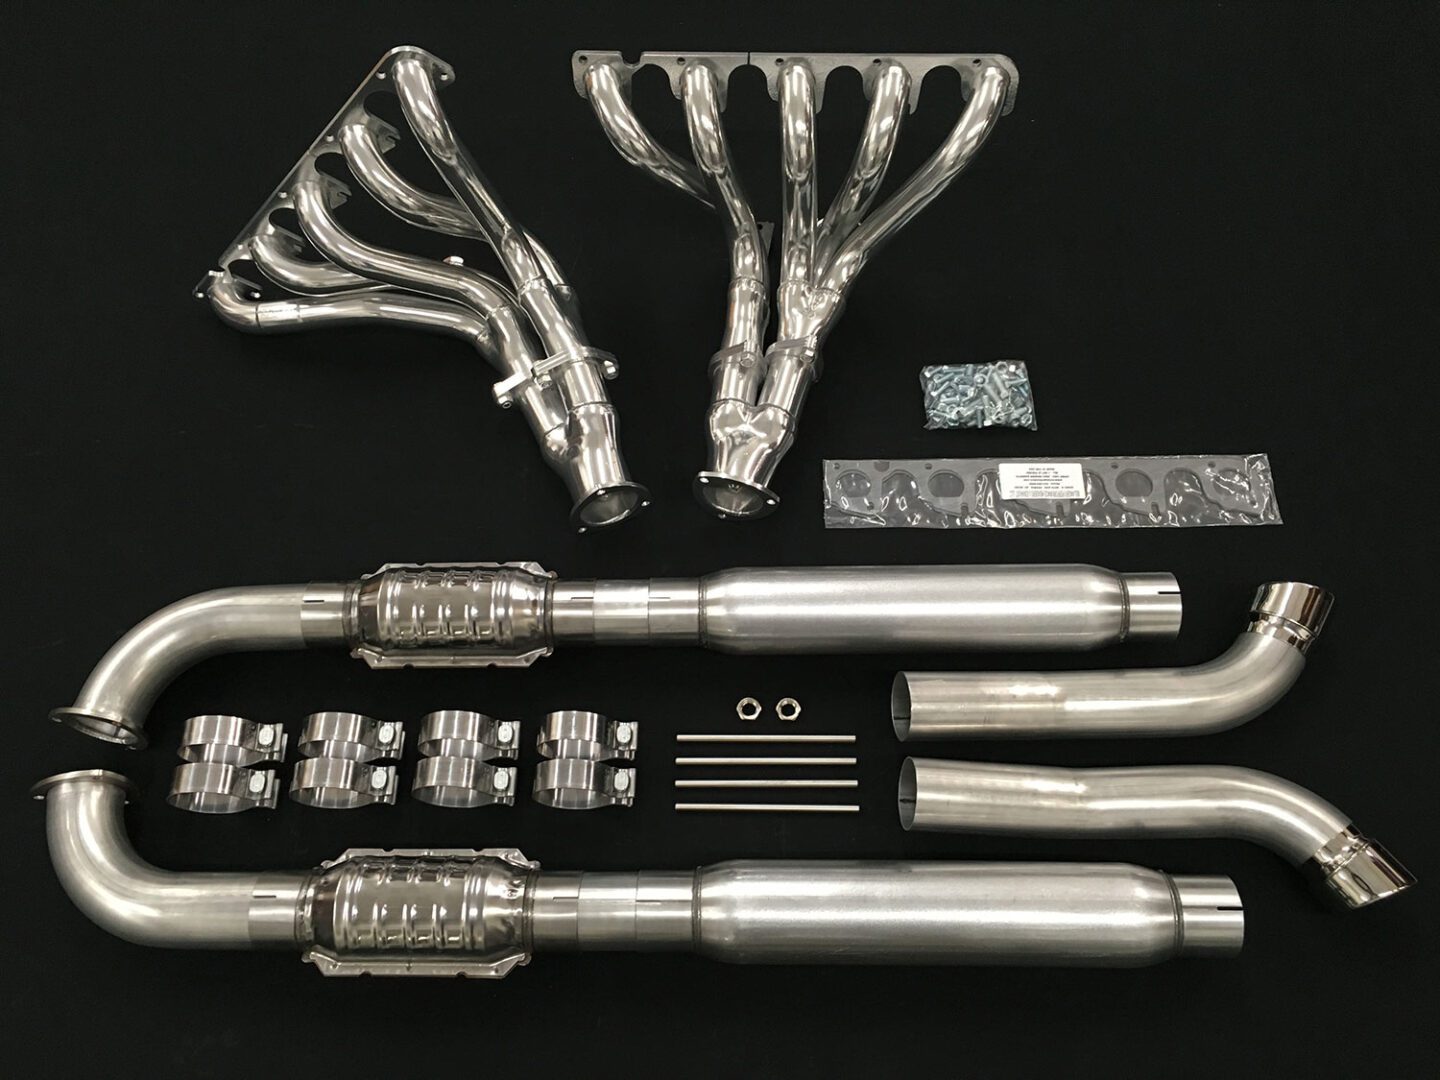 A set of exhaust pipes and other parts.